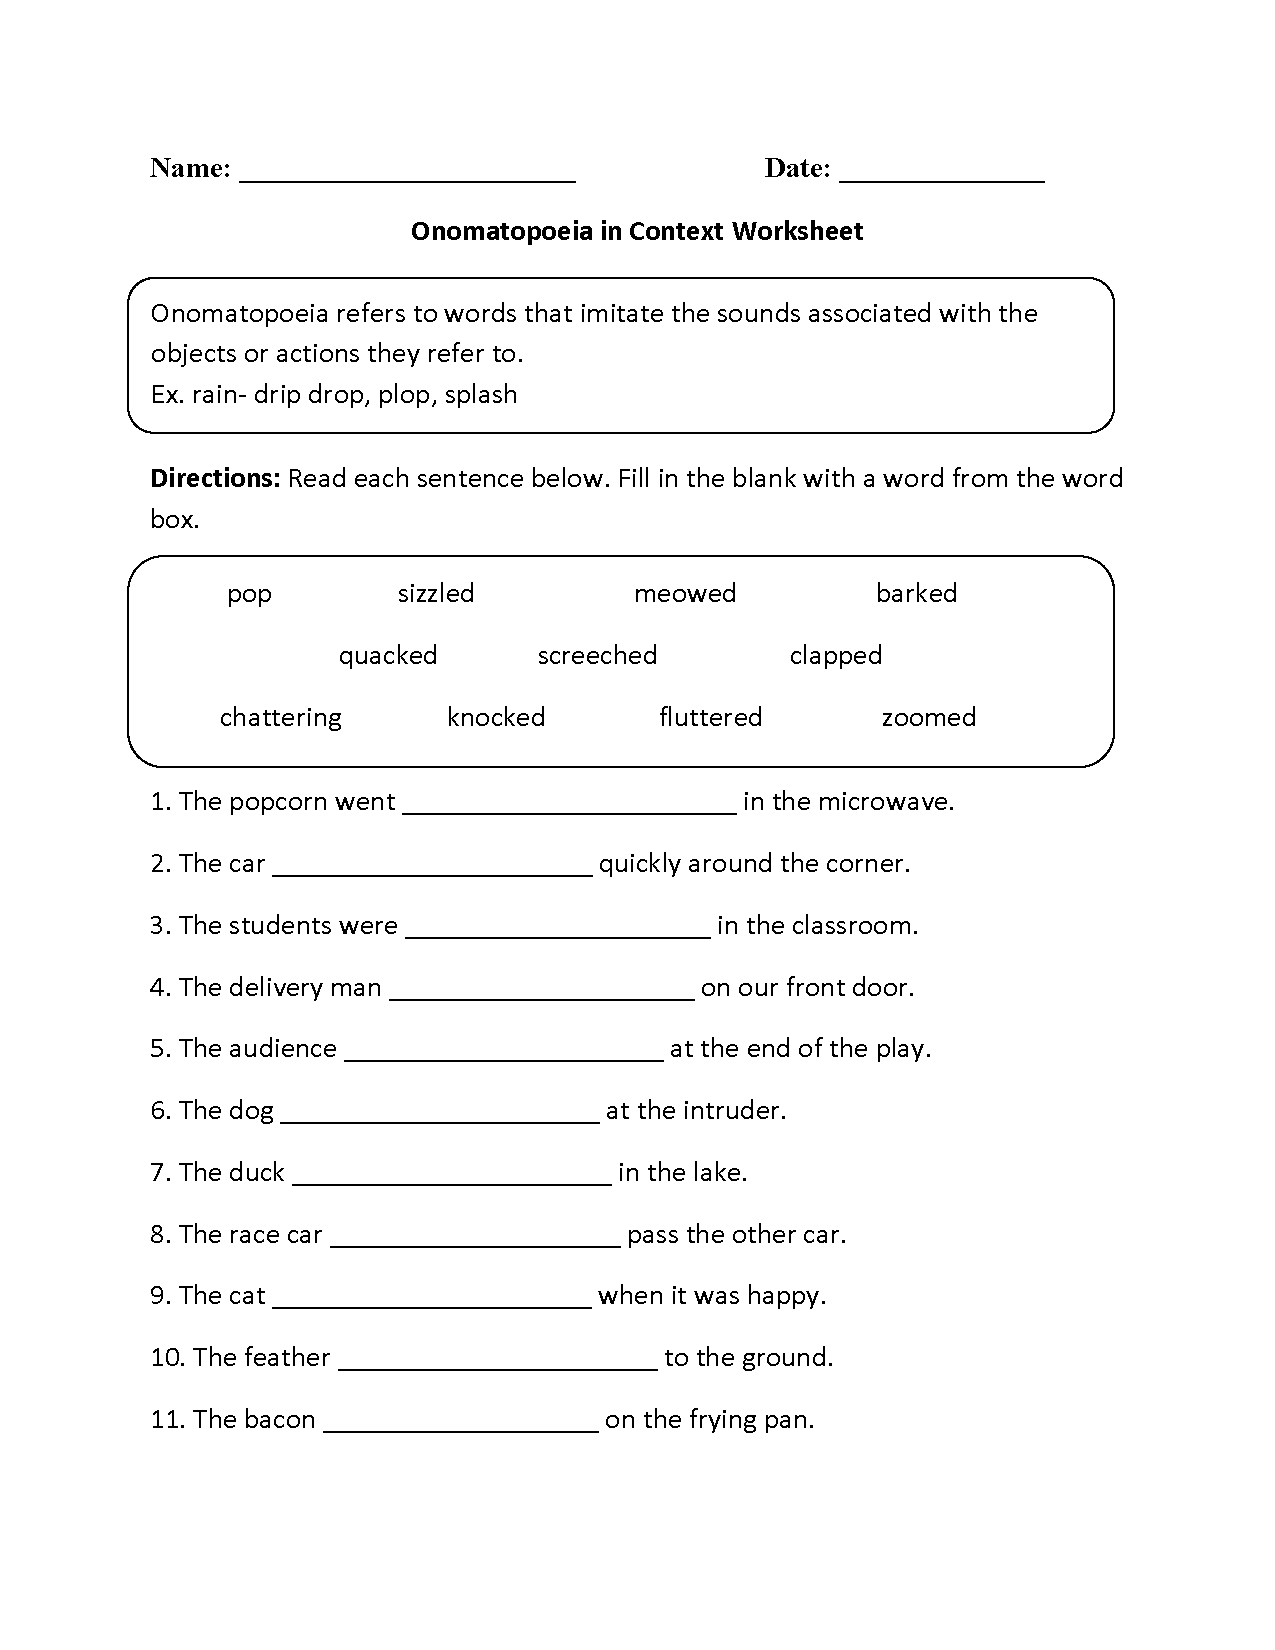 10 Best Images of English Worksheets Grade 8 - Informational Graphic